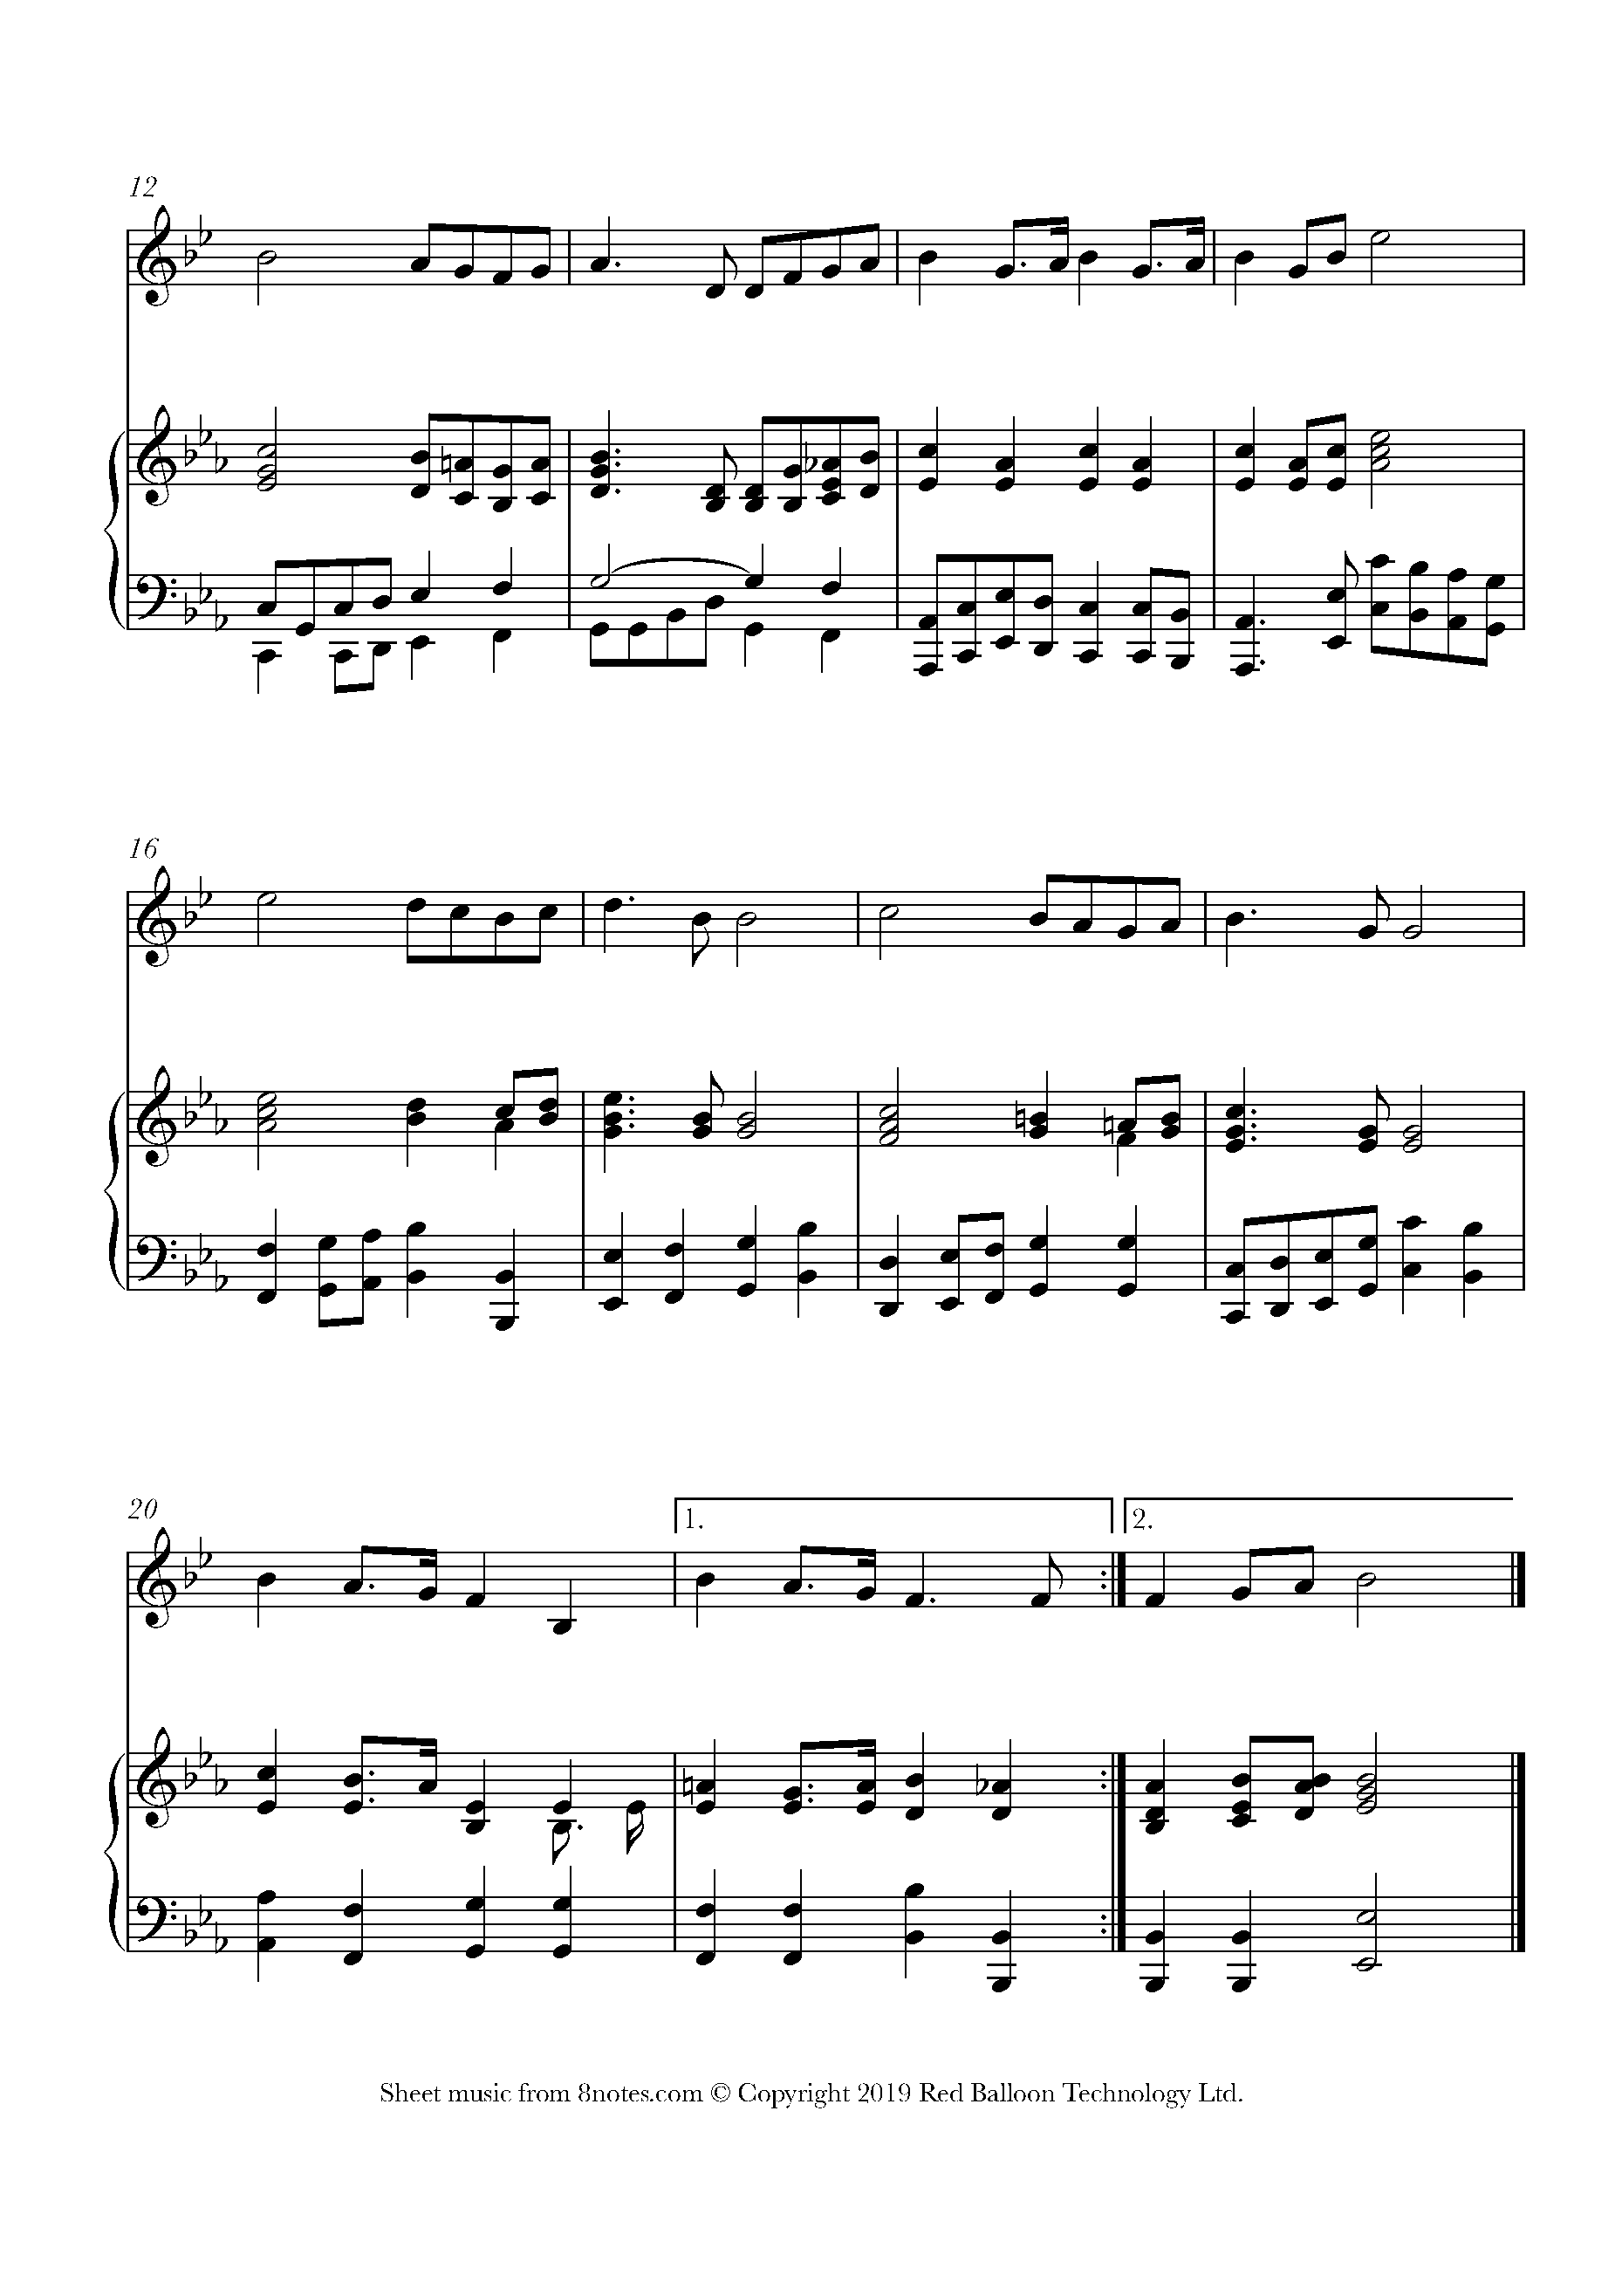 National Anthem of Sheet music for French - 8notes.com